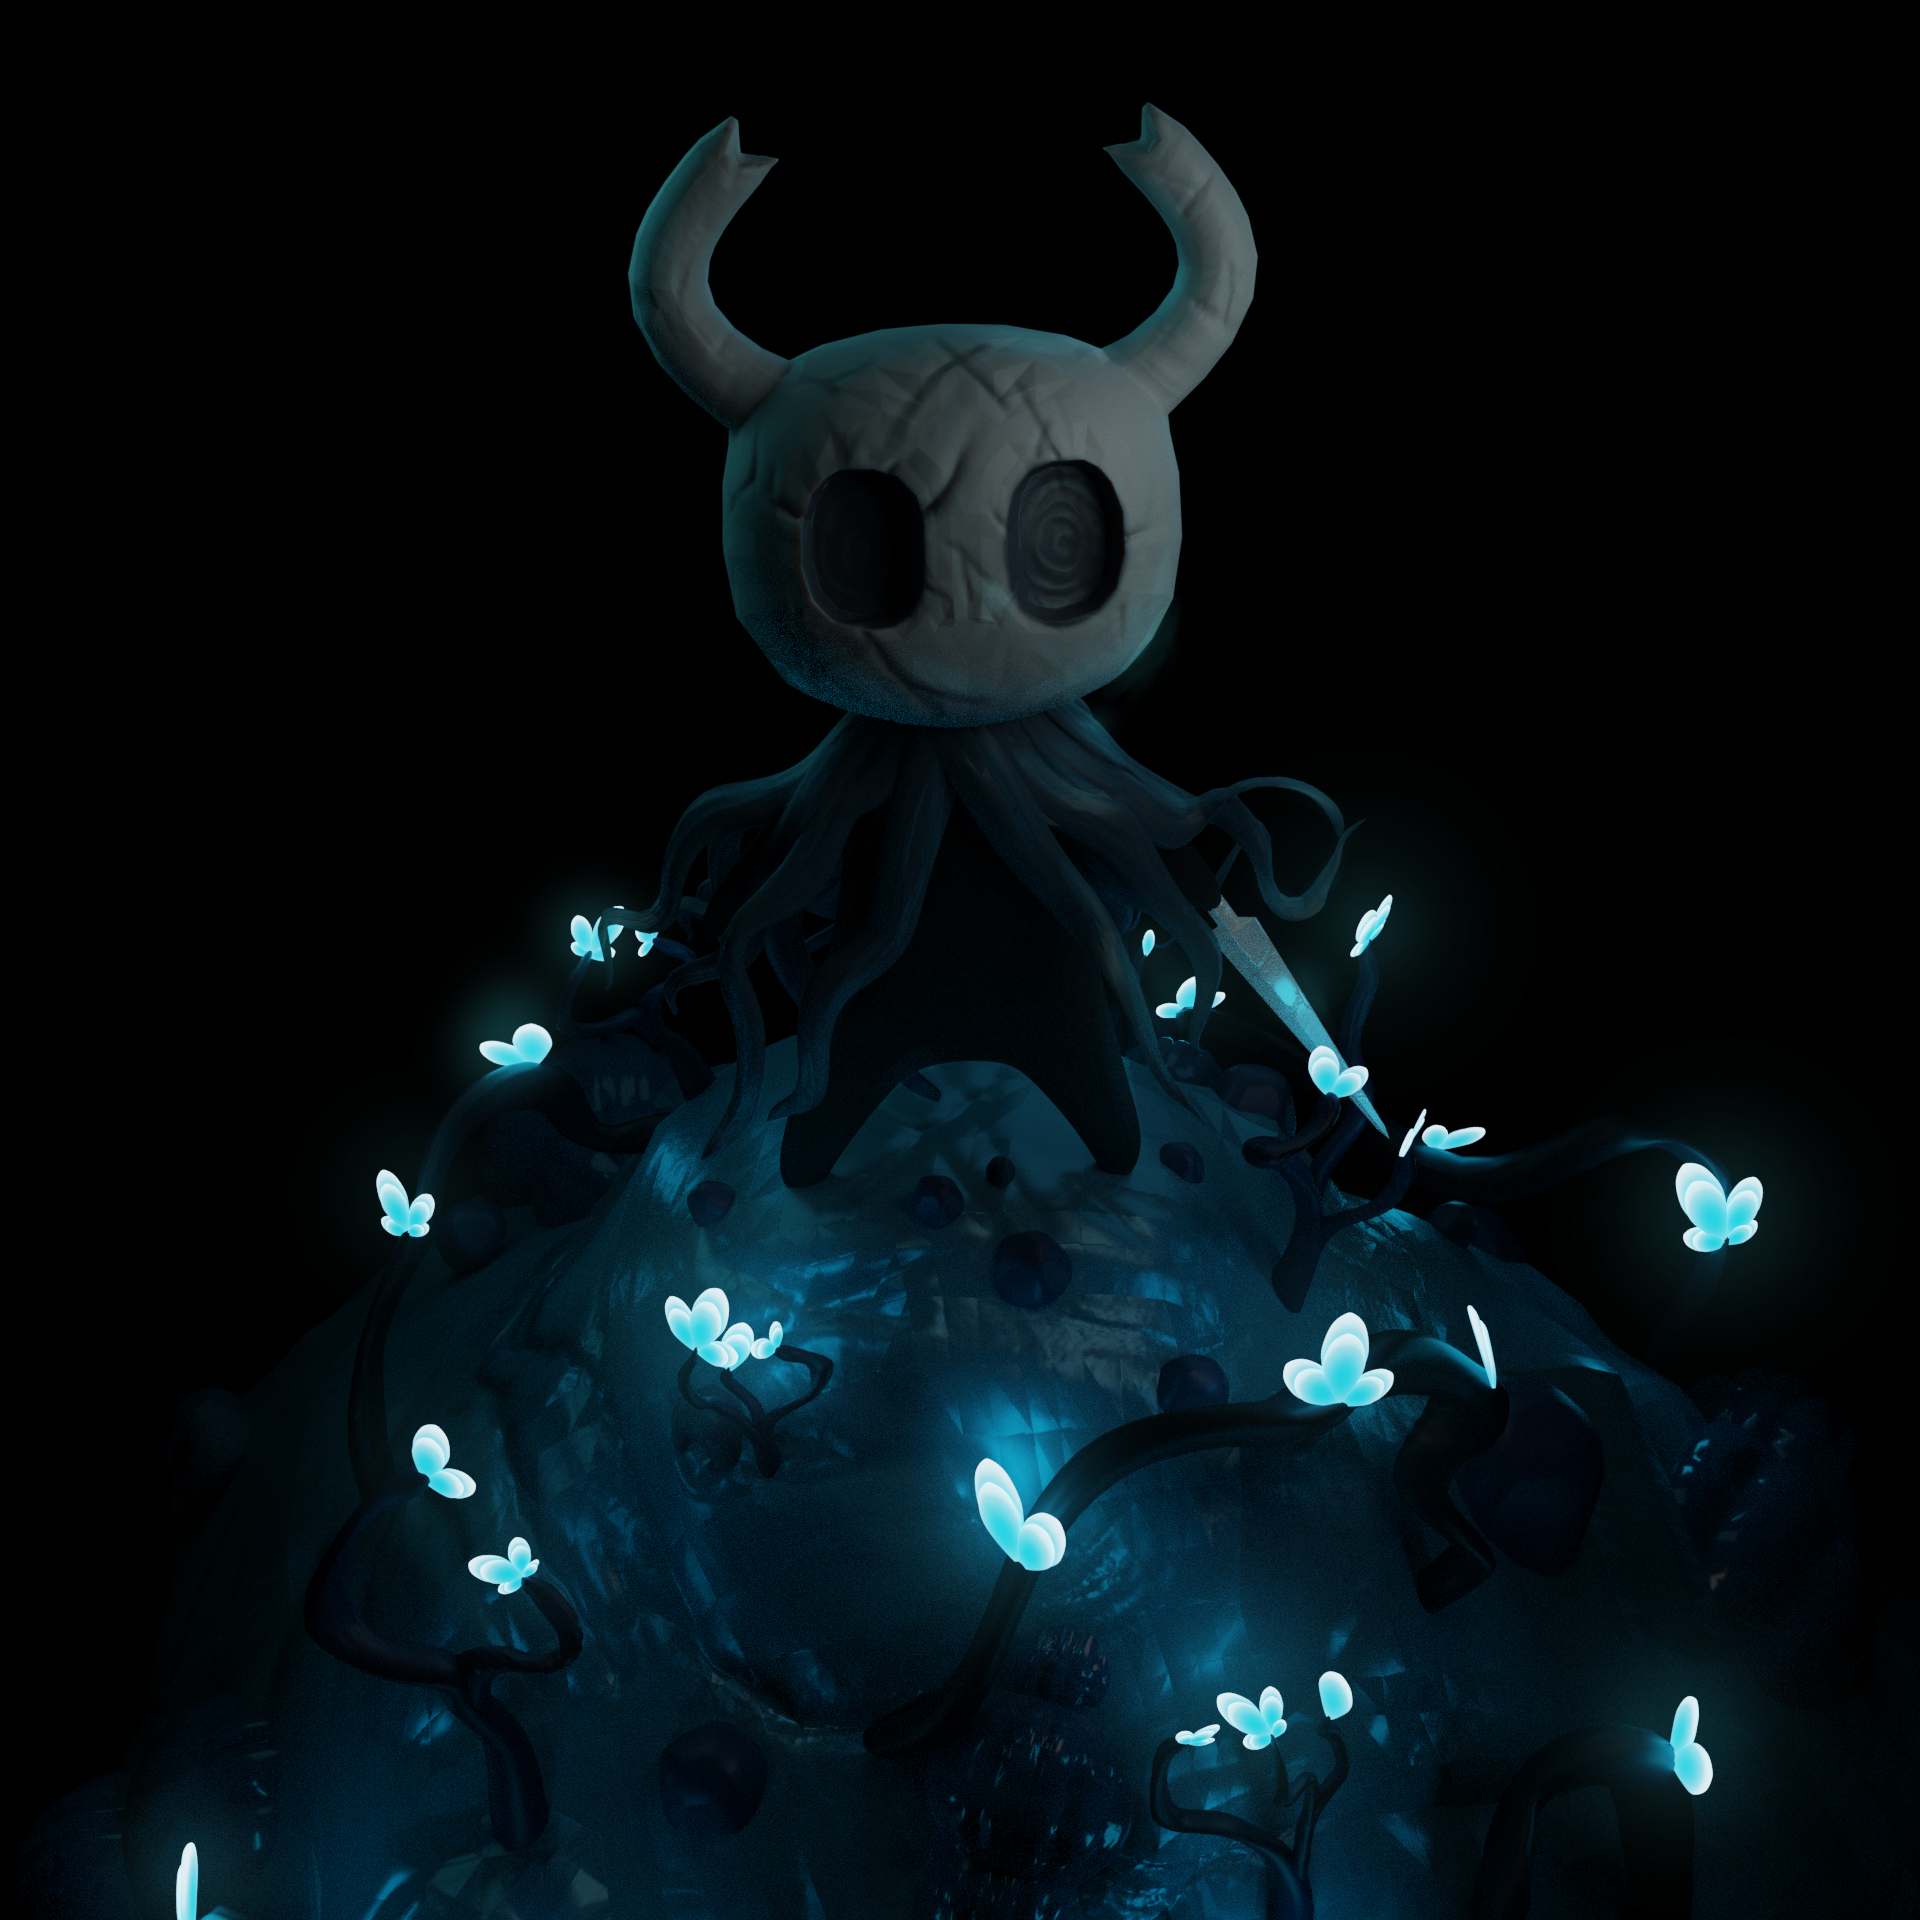 Hollow knight preview image 1